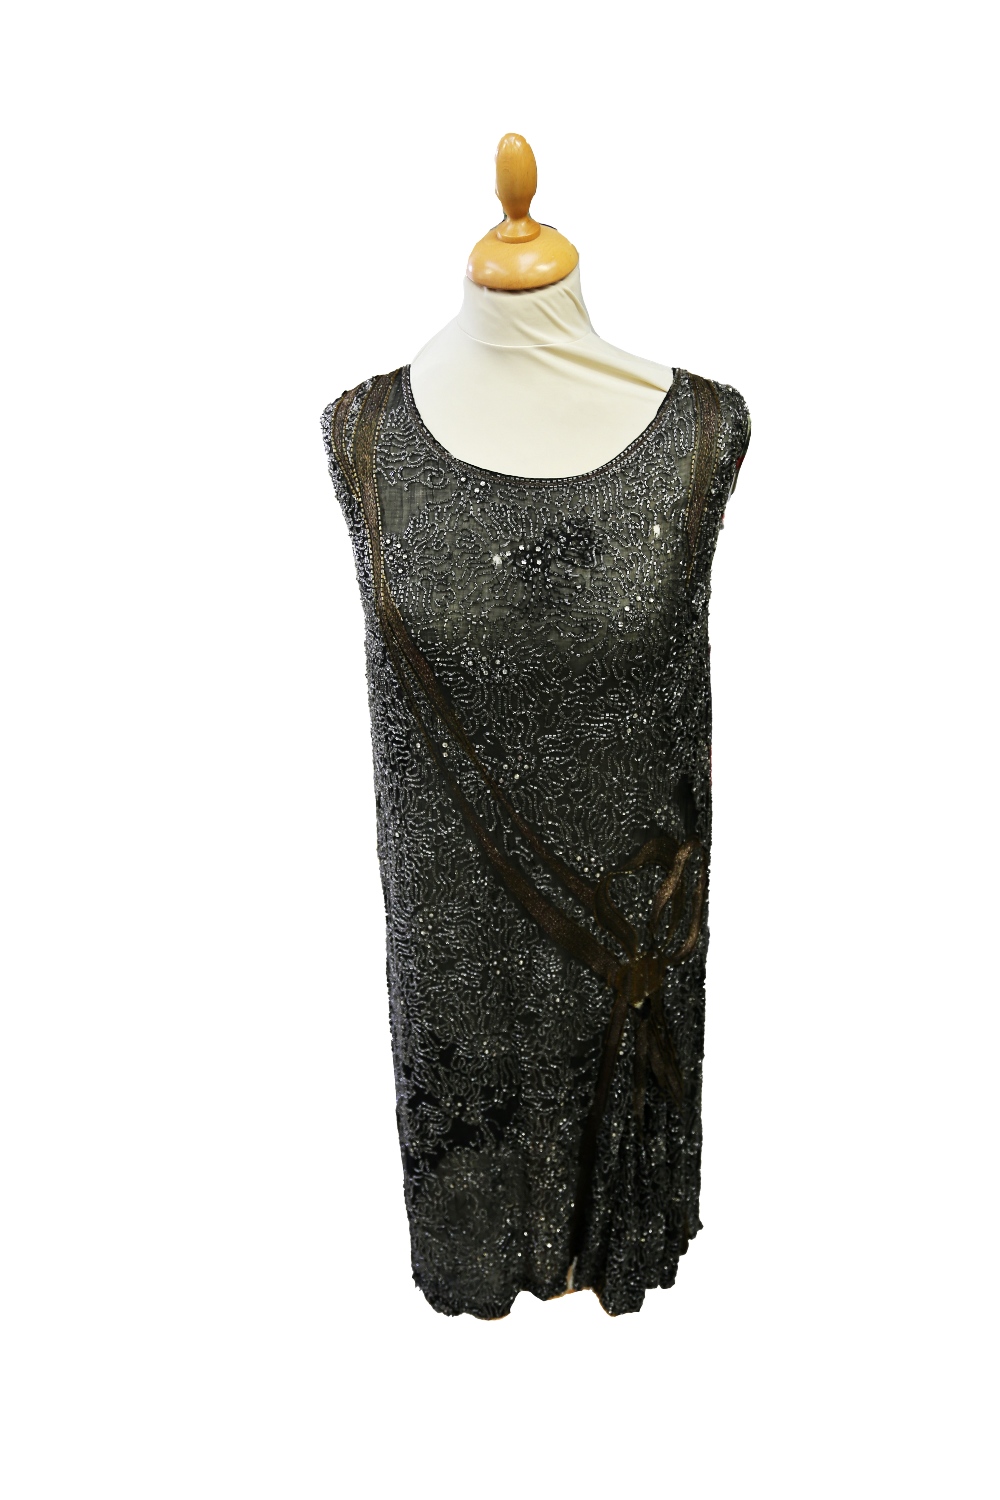 A black beaded mid 1920s dree with grey beads and paste stones, a decorate braided 'Deco' runs